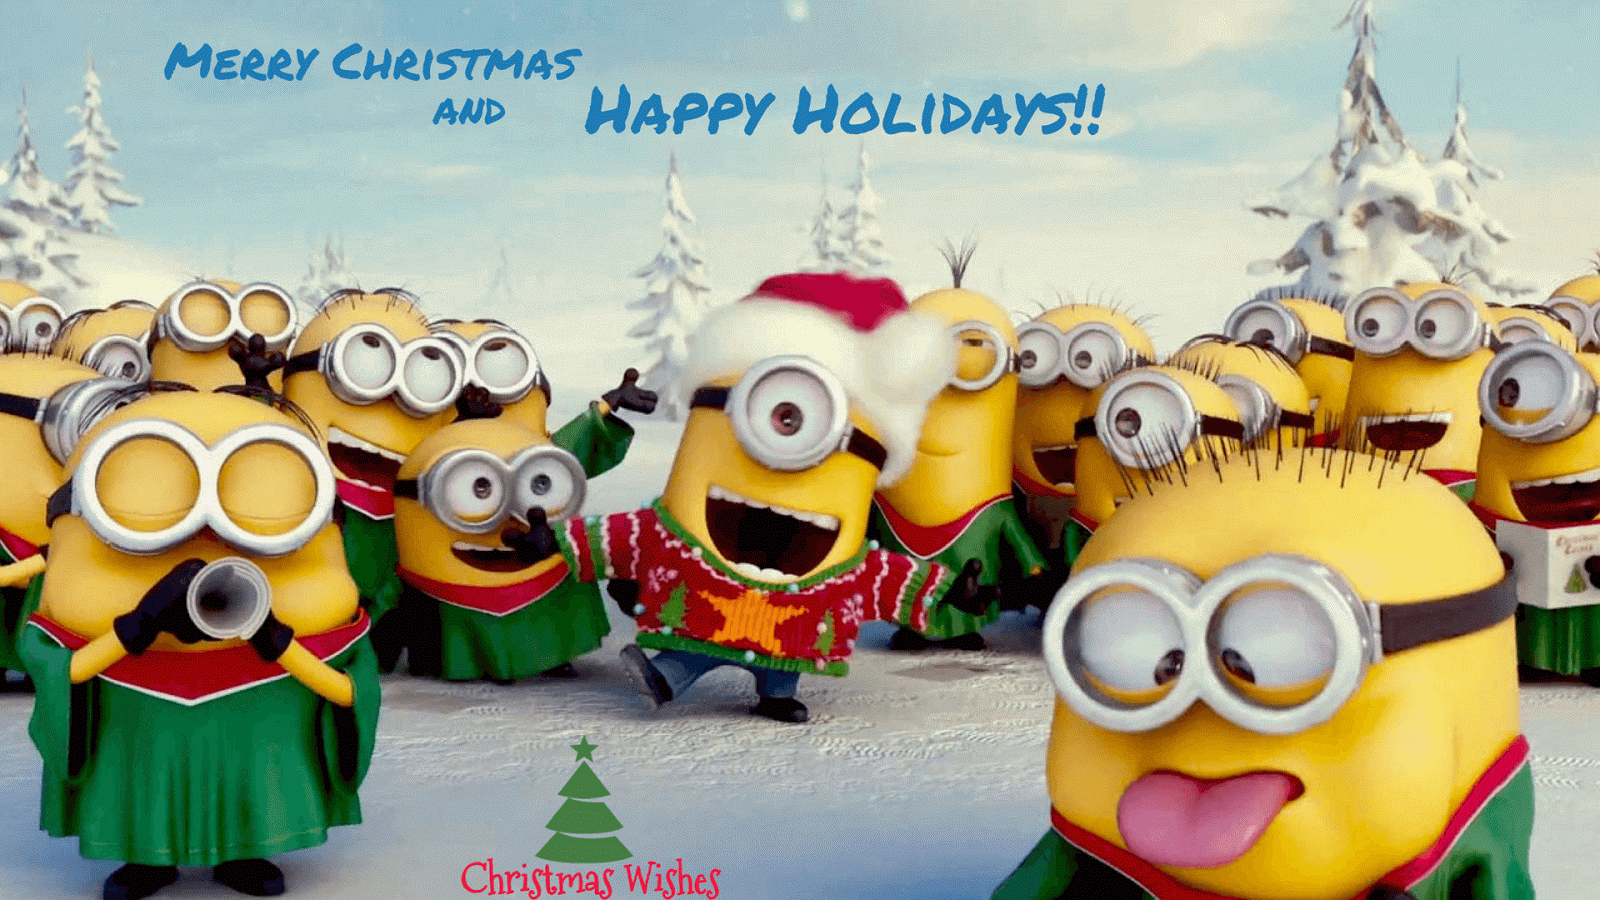 Despicable Minions Wallpaper Desktop Christmas Picture to Pin